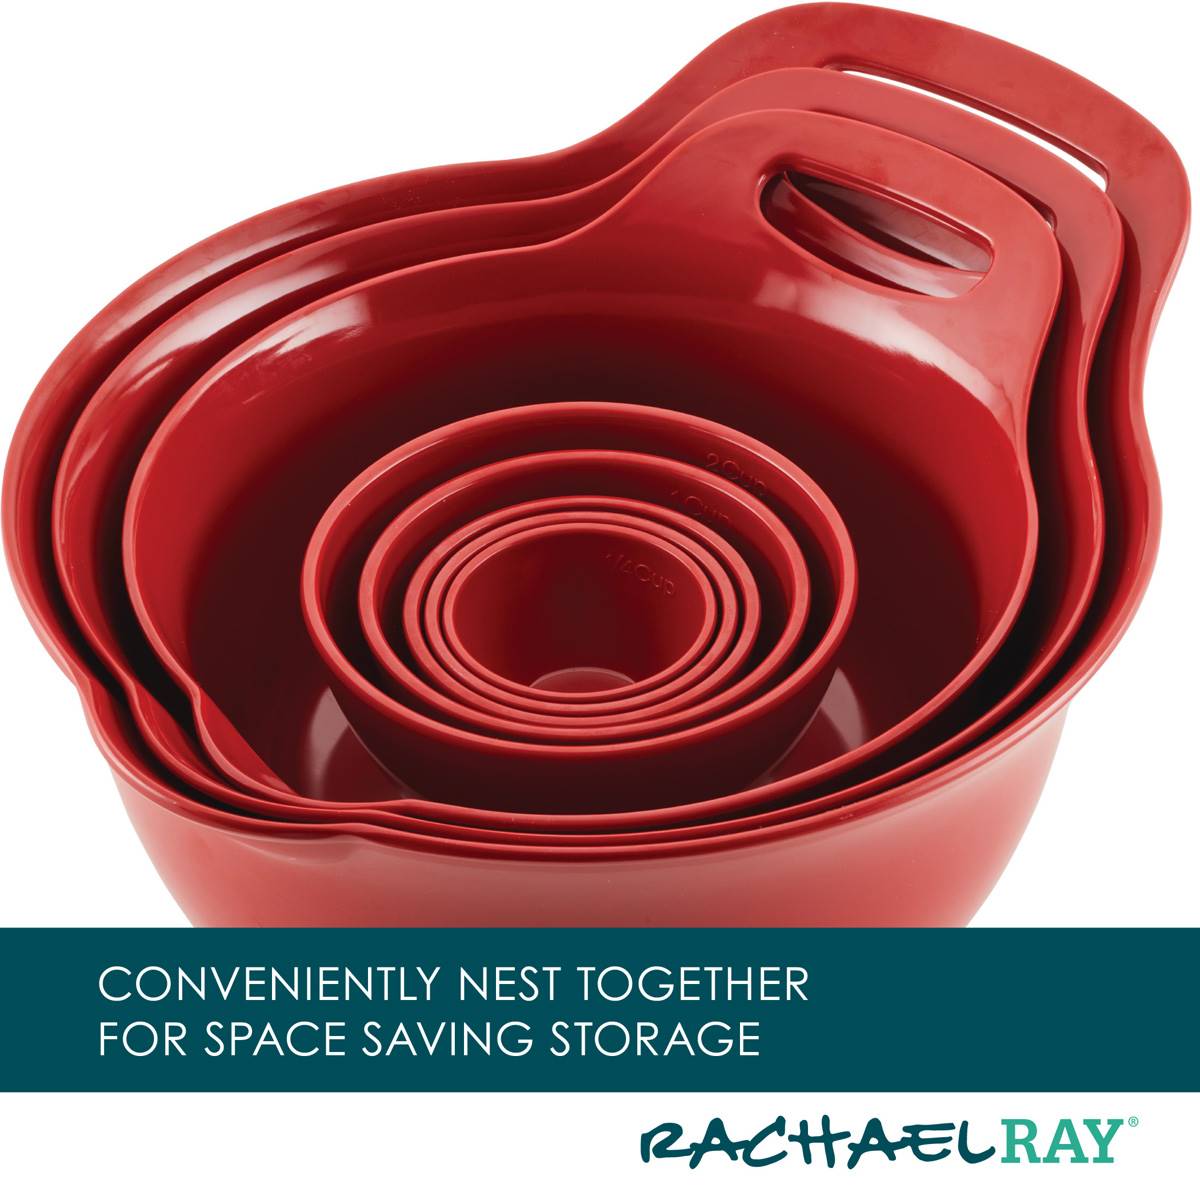 Rachael Ray 10pc. Mix & Measure Mixing Bowl Set - Red